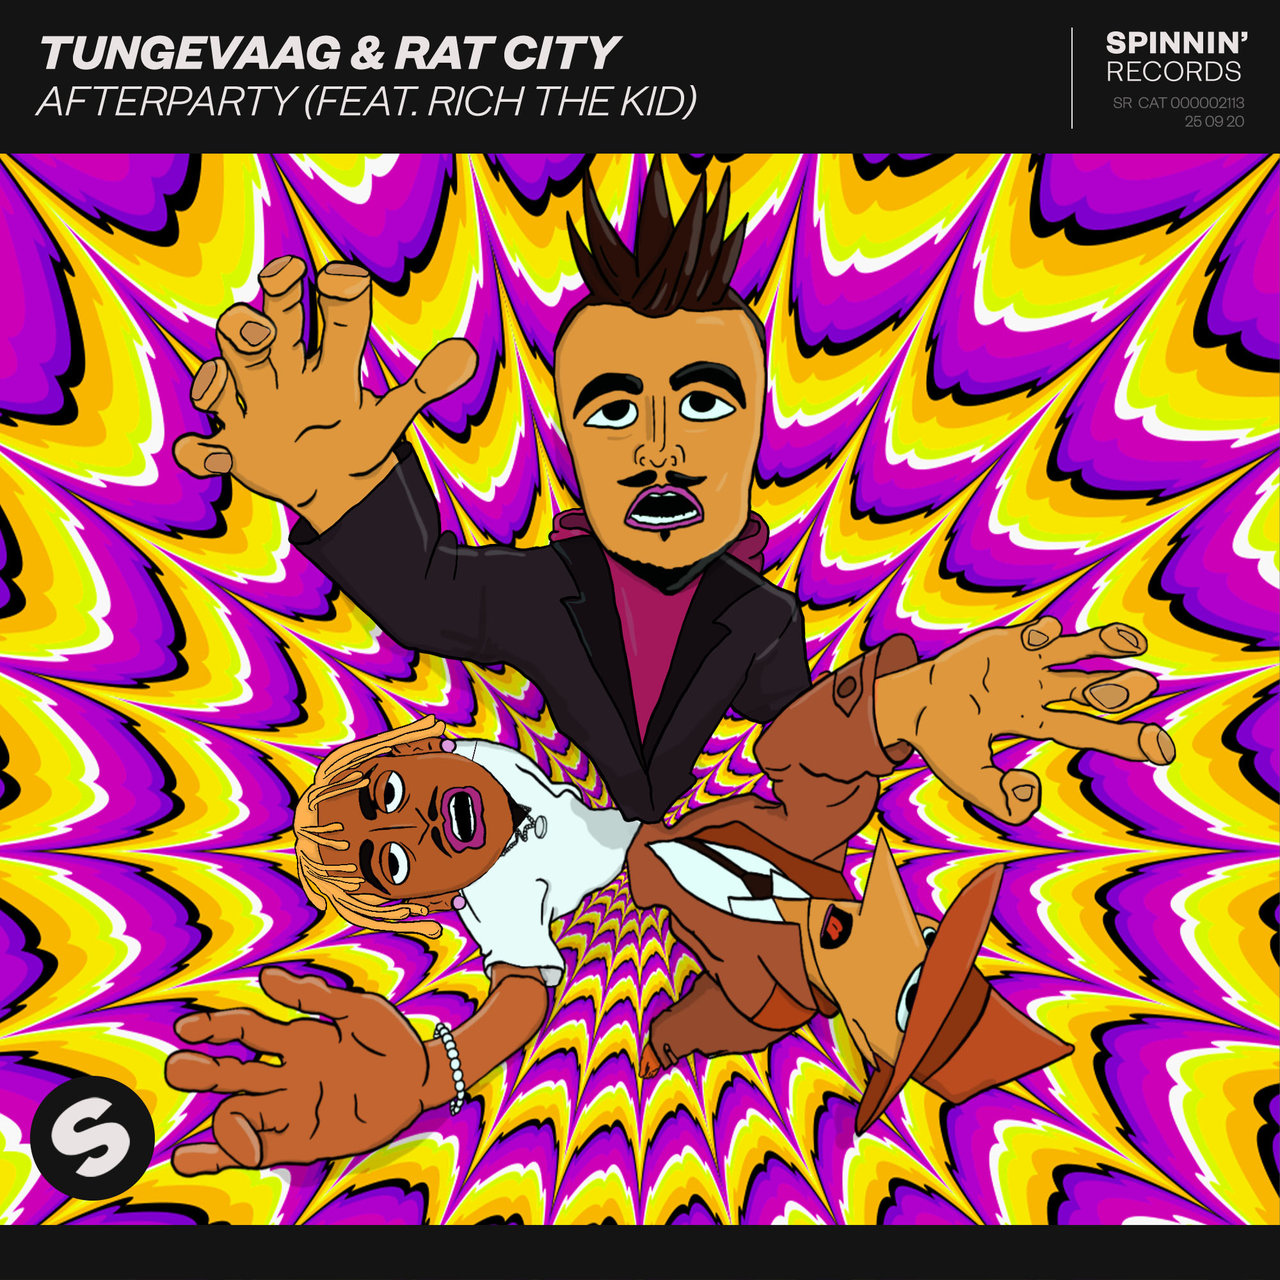 Tungevaag & Rat City featuring Rich The Kid — Afterparty cover artwork